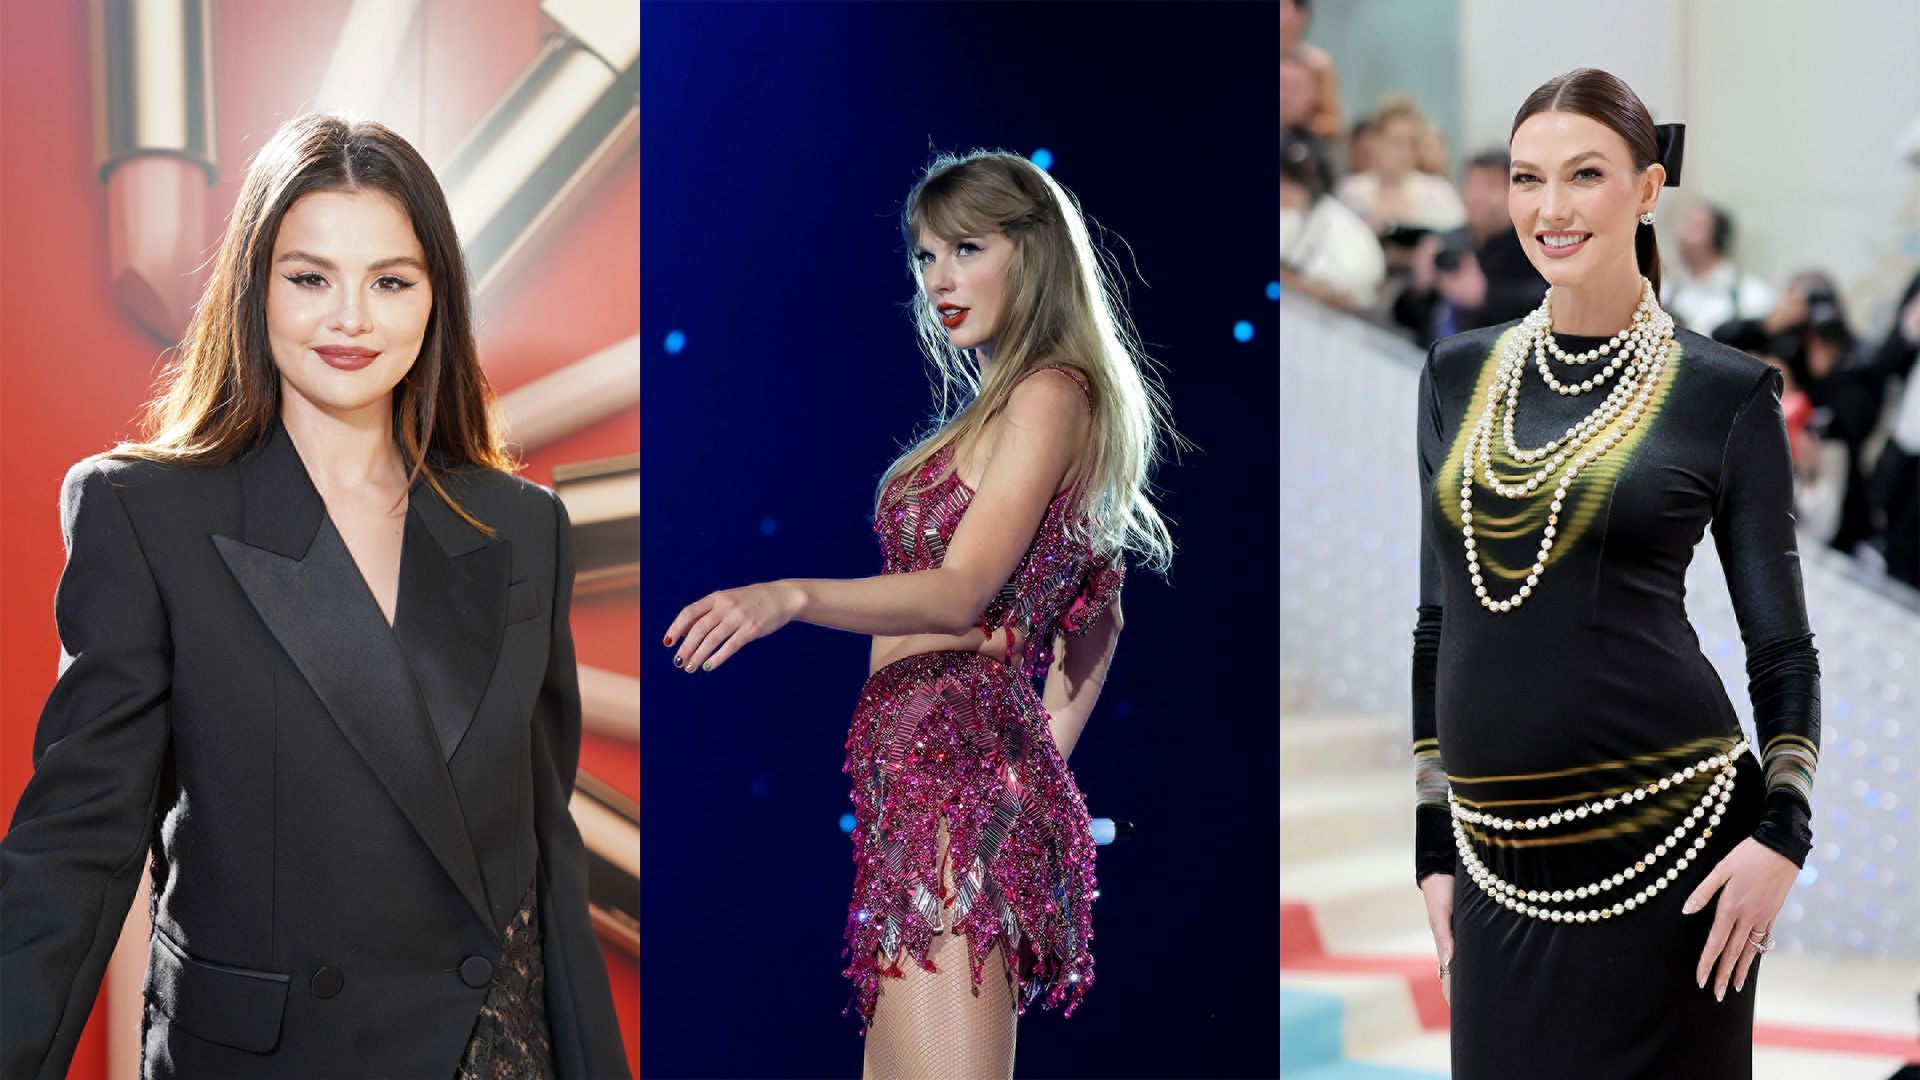 Taylor Swift's changing girl squad — from Selena Gomez and Gigi Hadid, to Zendaya and Karlie Kloss